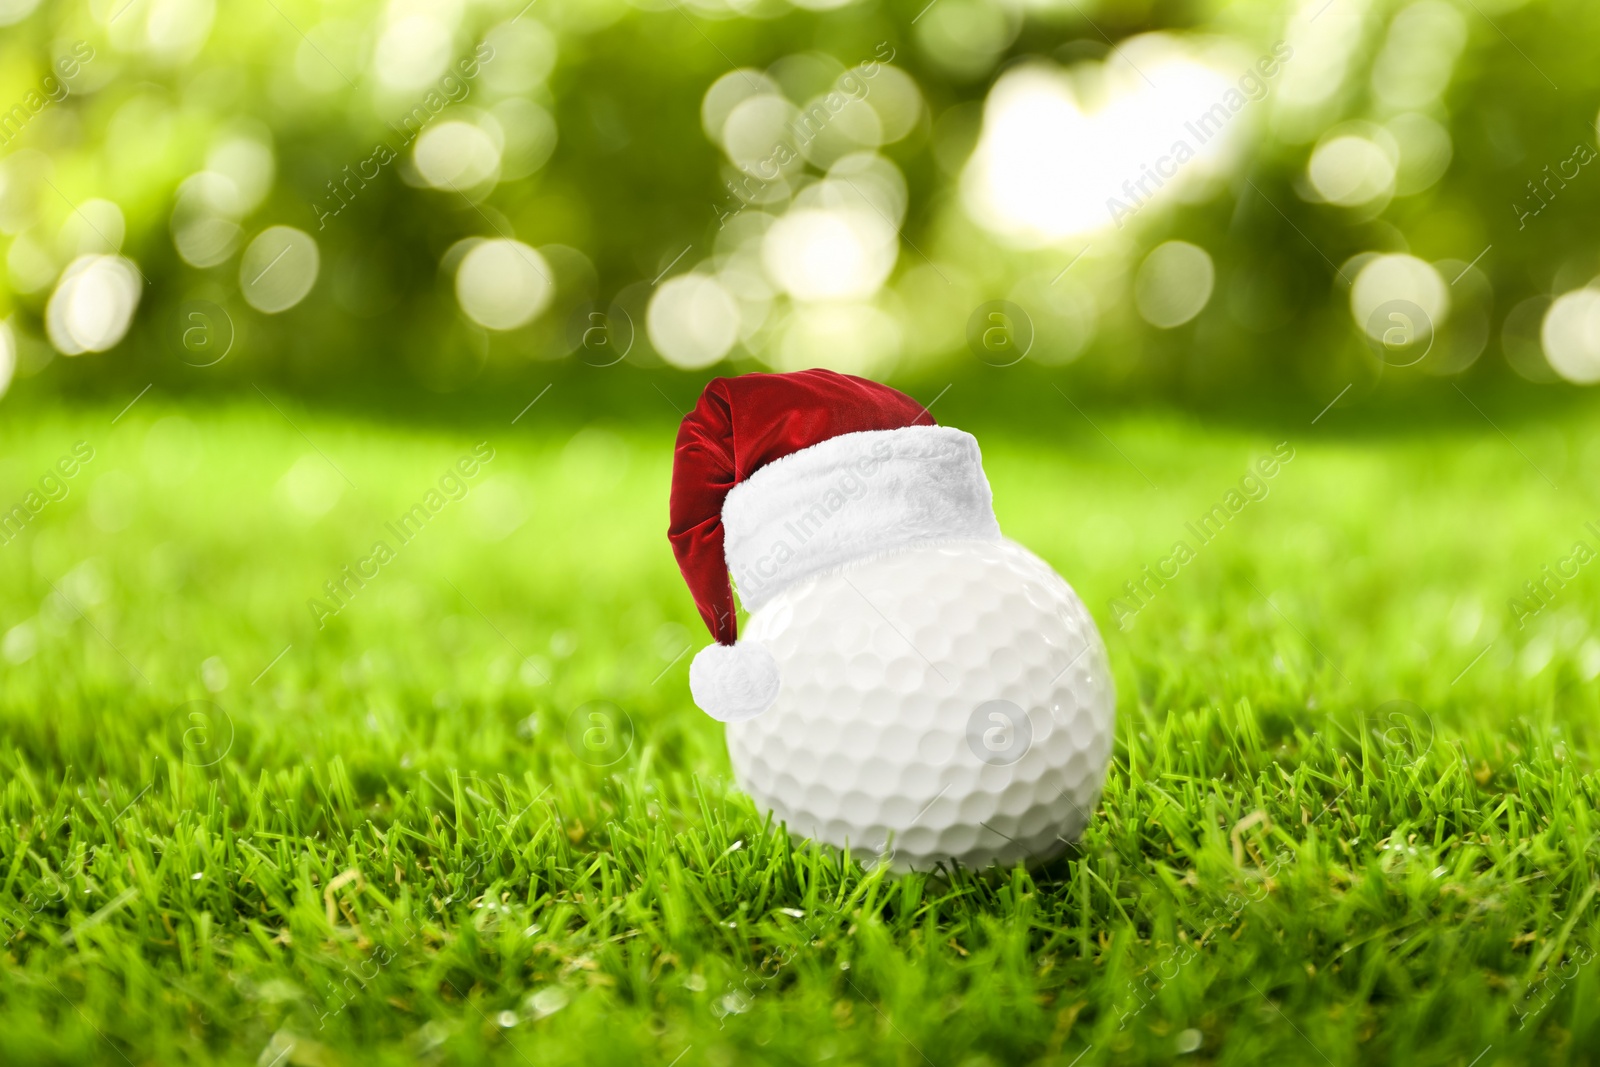 Image of Golf ball with small Santa hat on green course